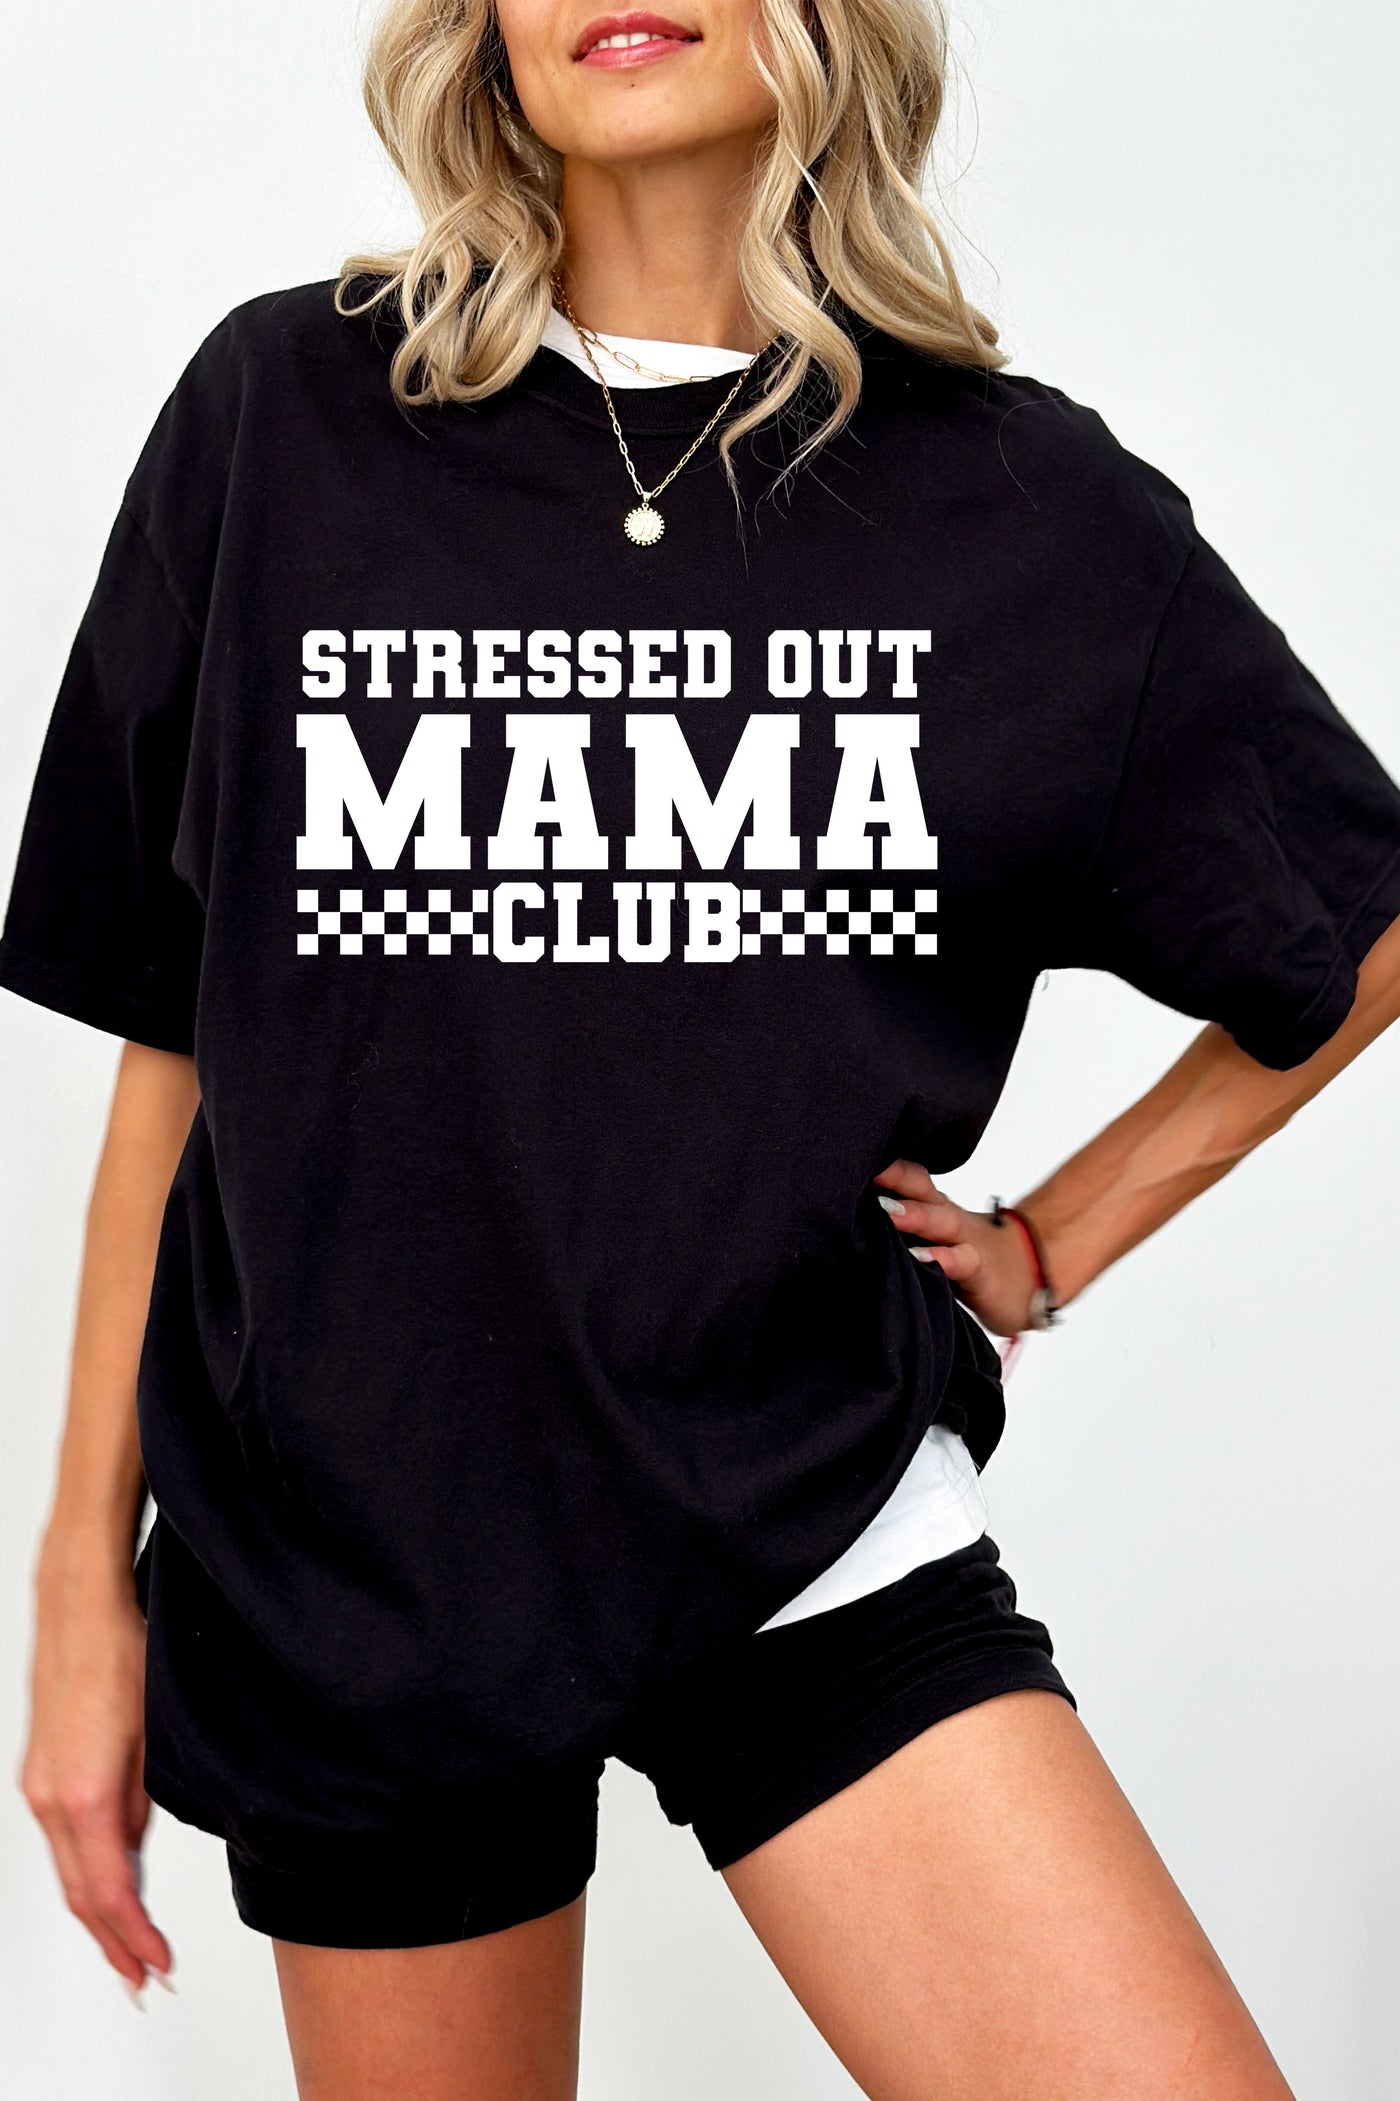 STRESSED OUT MAMA CLUB